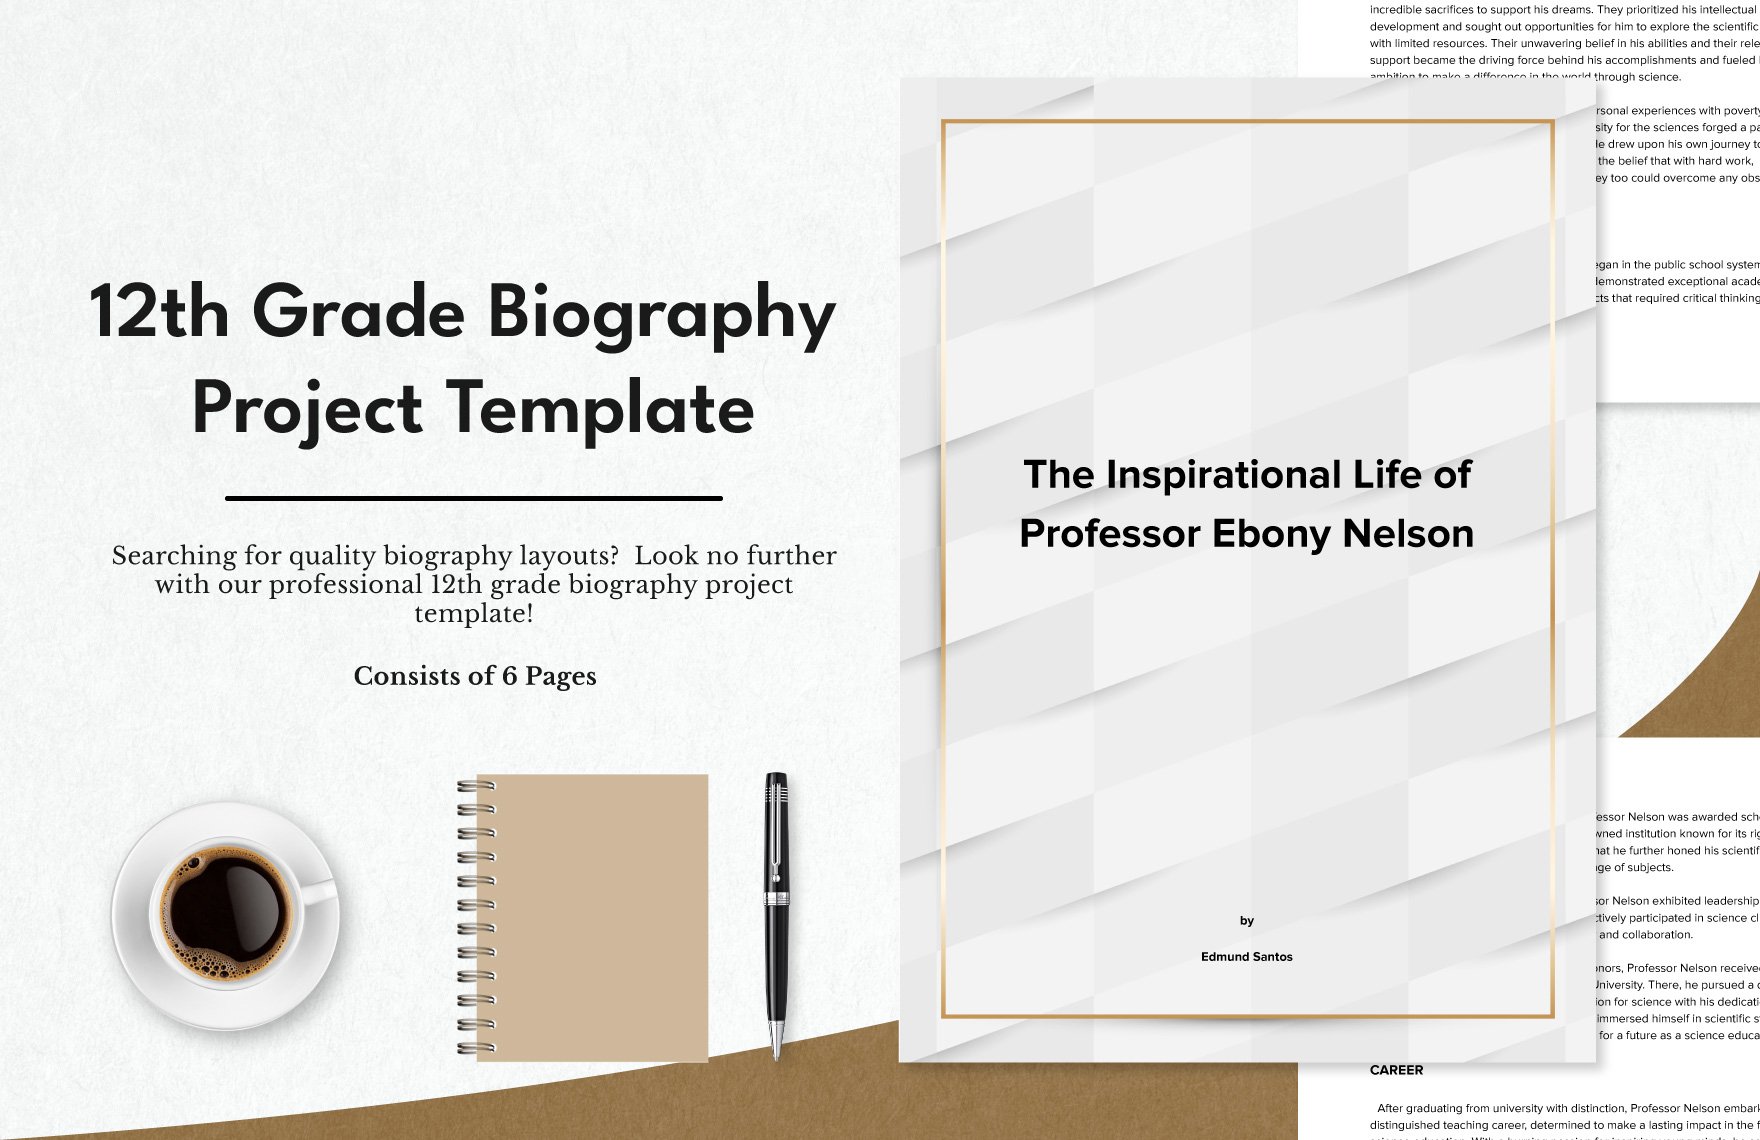 12th Grade Biography Project Template